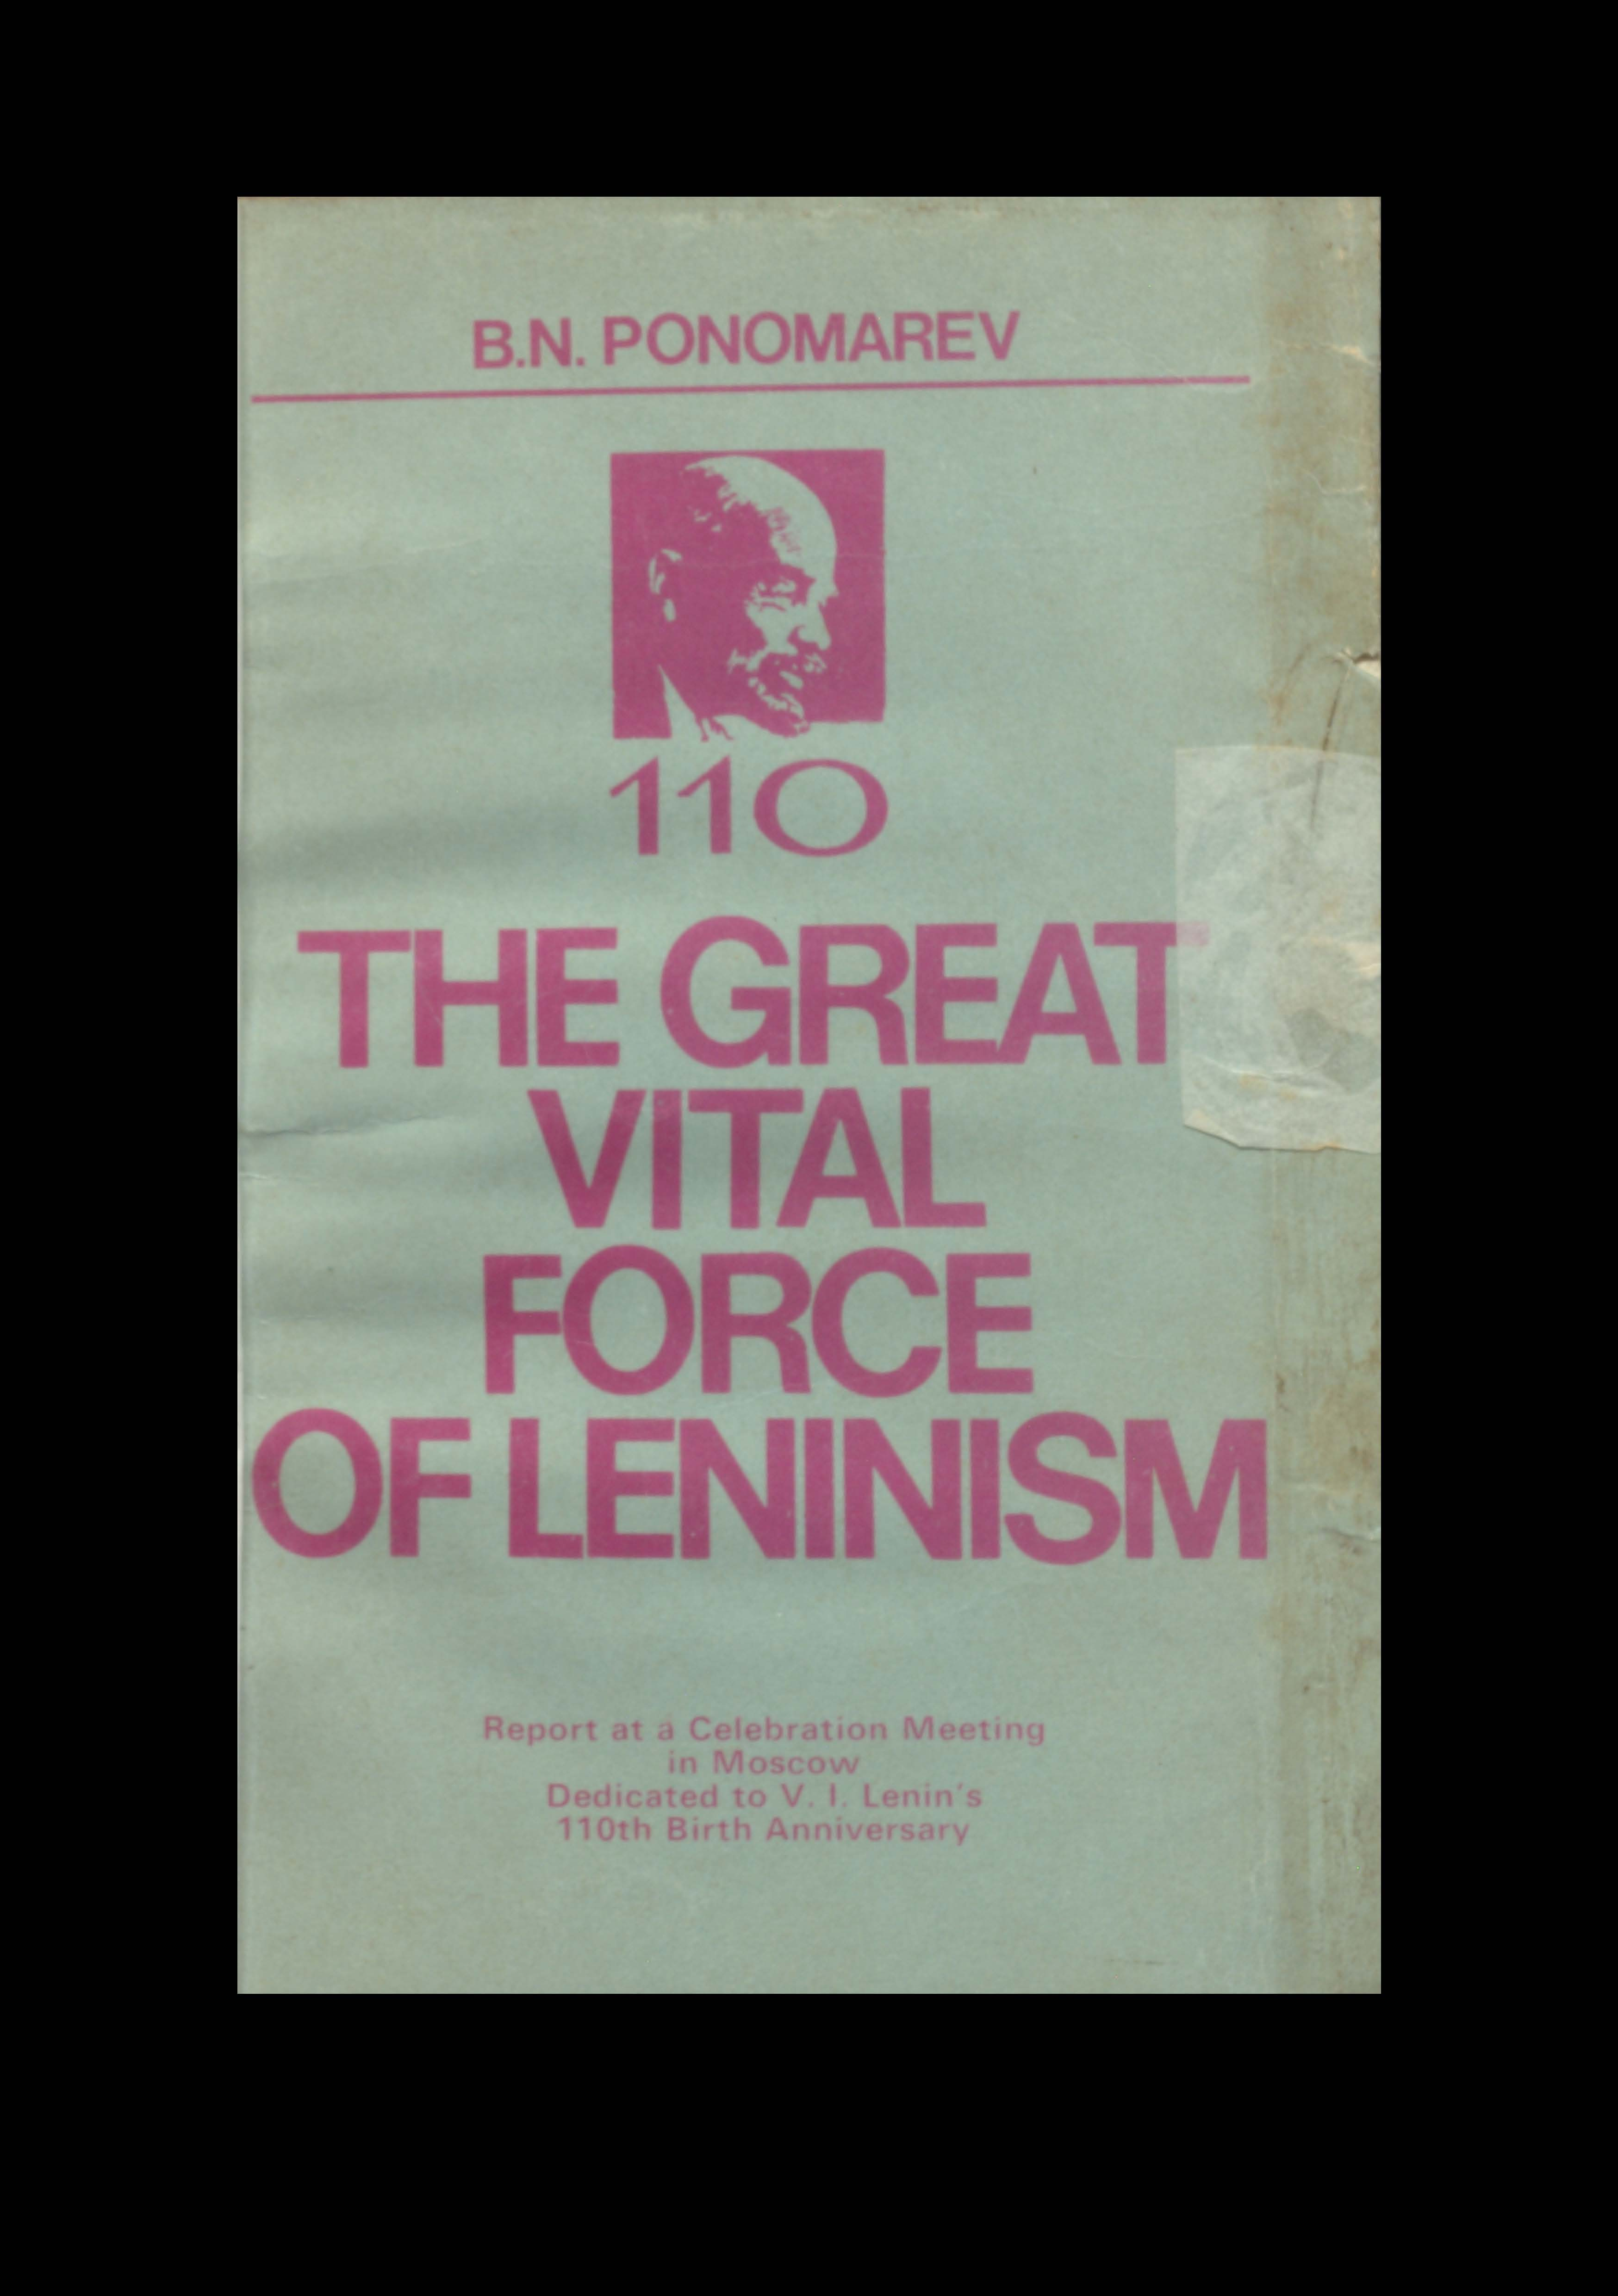 The Great Vital Force of Leninism